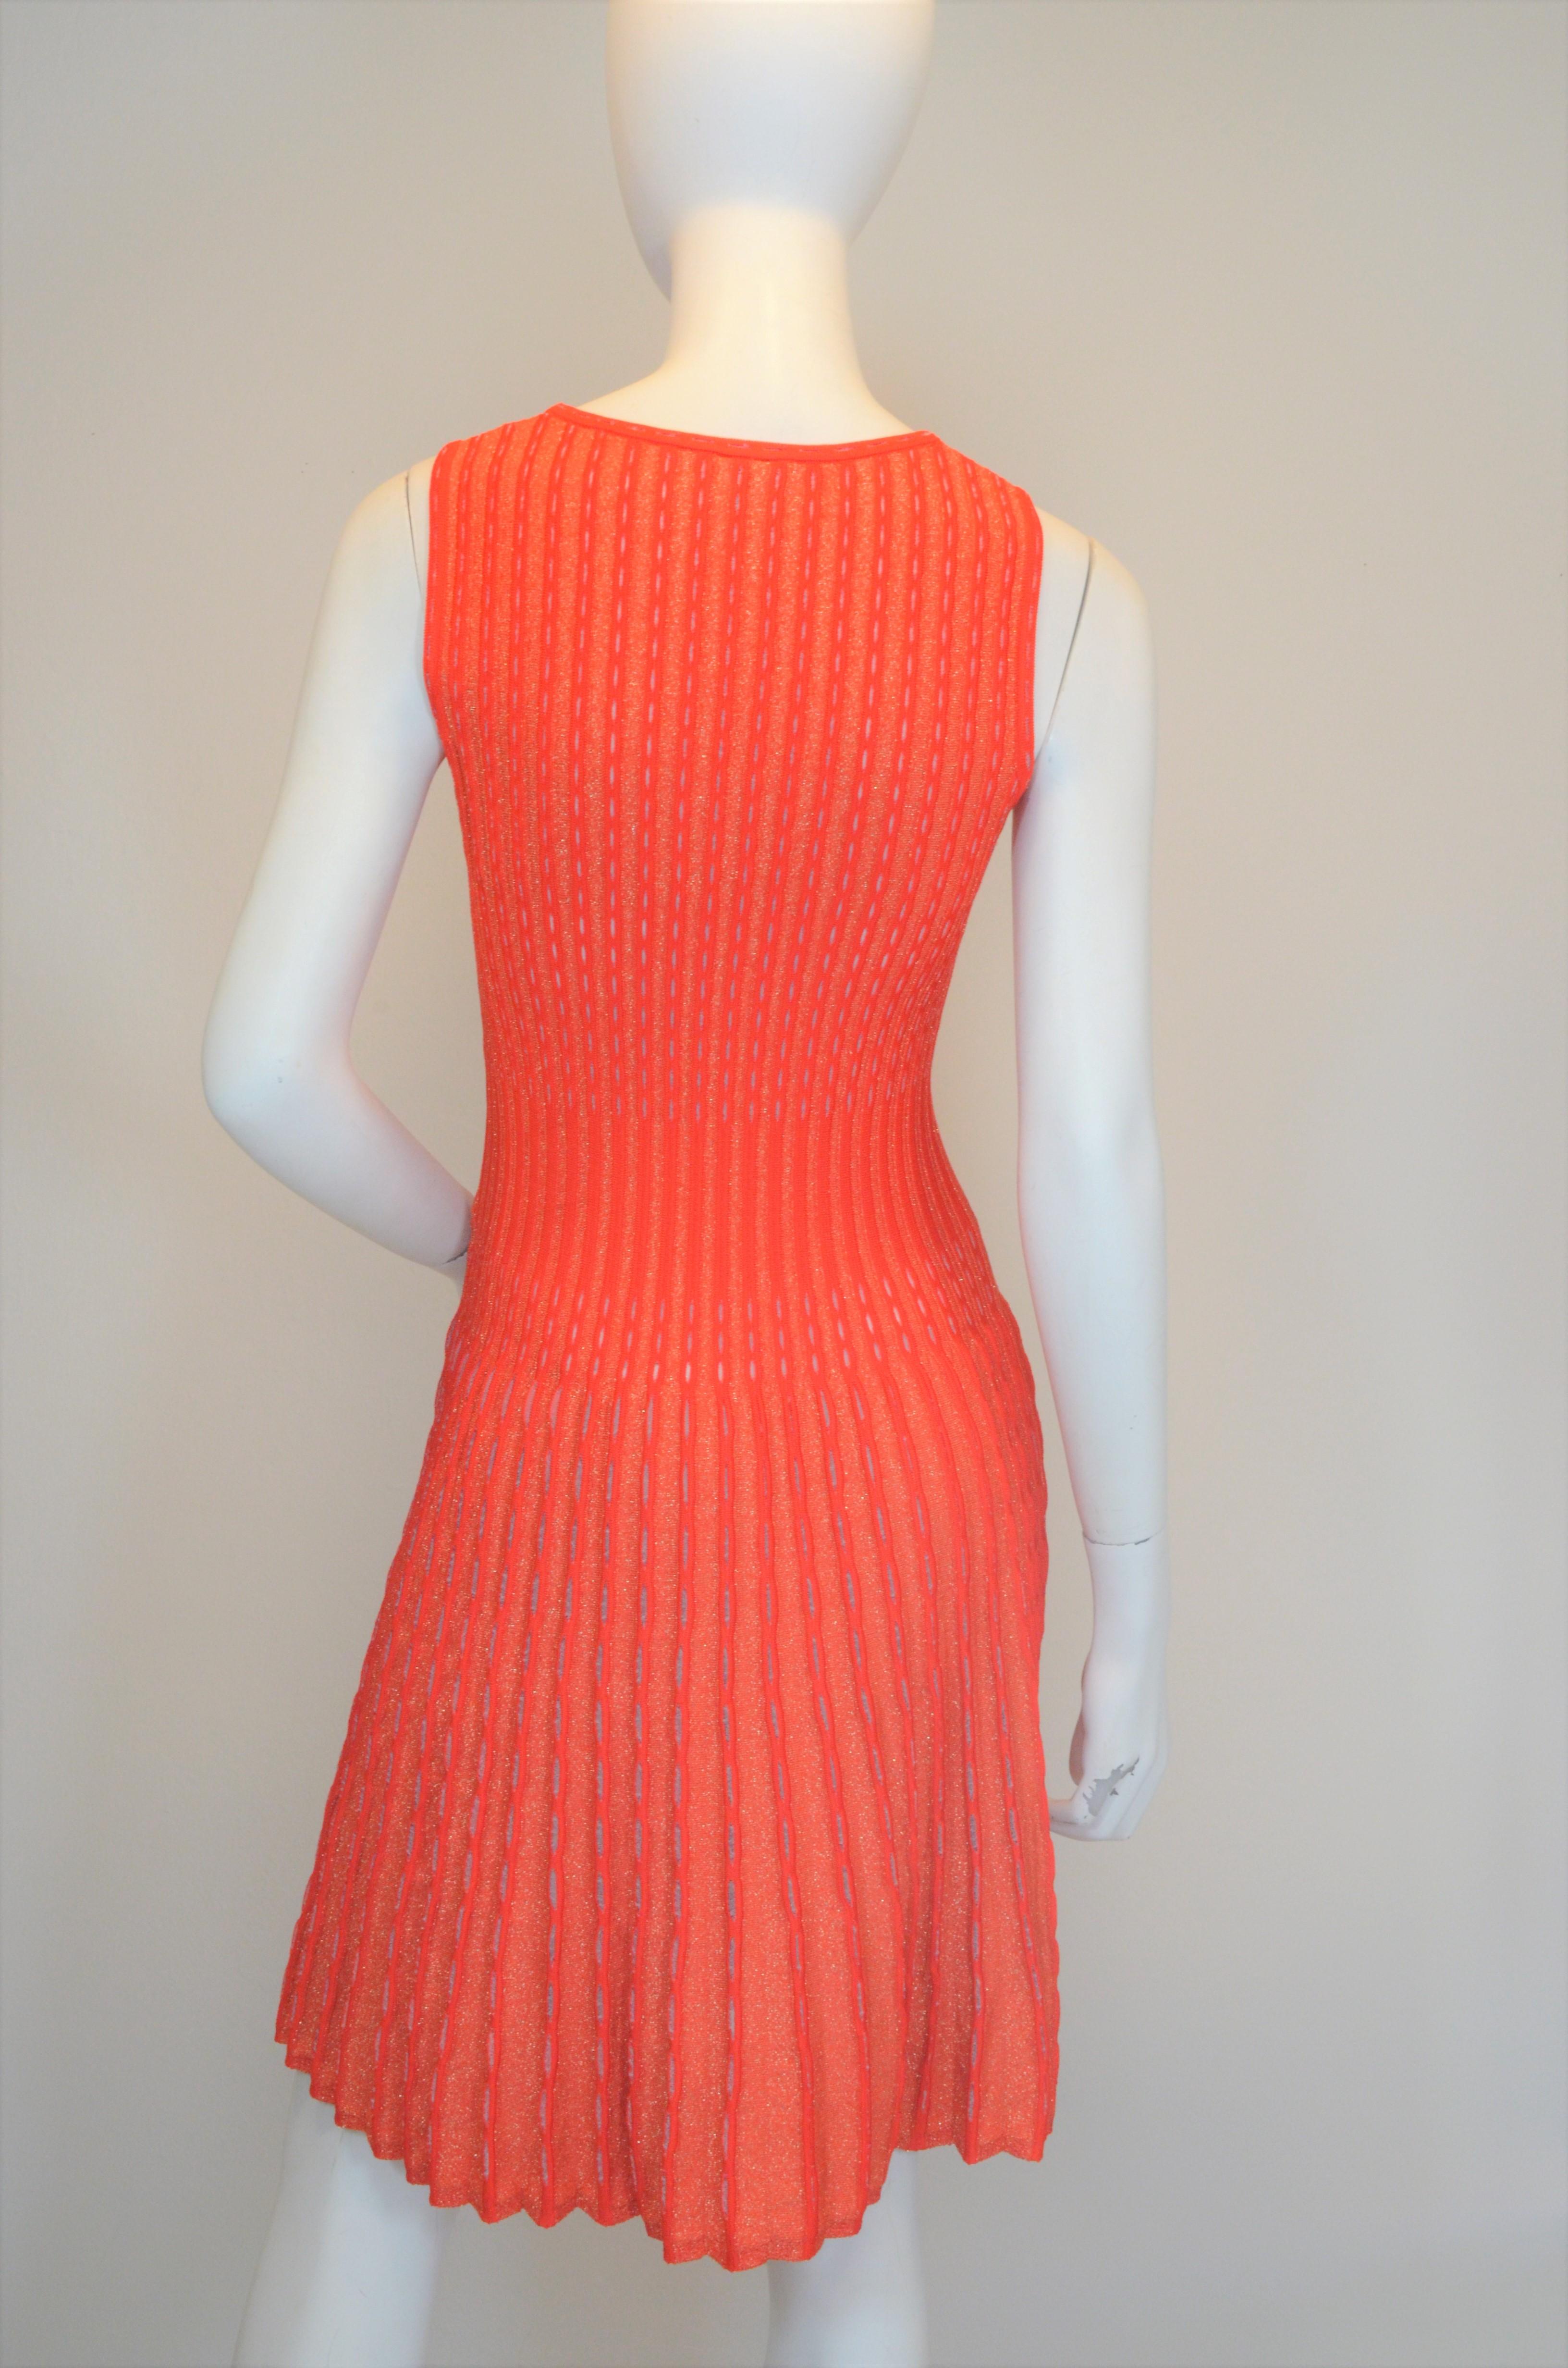 M Missoni Metallic Knit Fit and Flare Dress In Excellent Condition In Carmel, CA